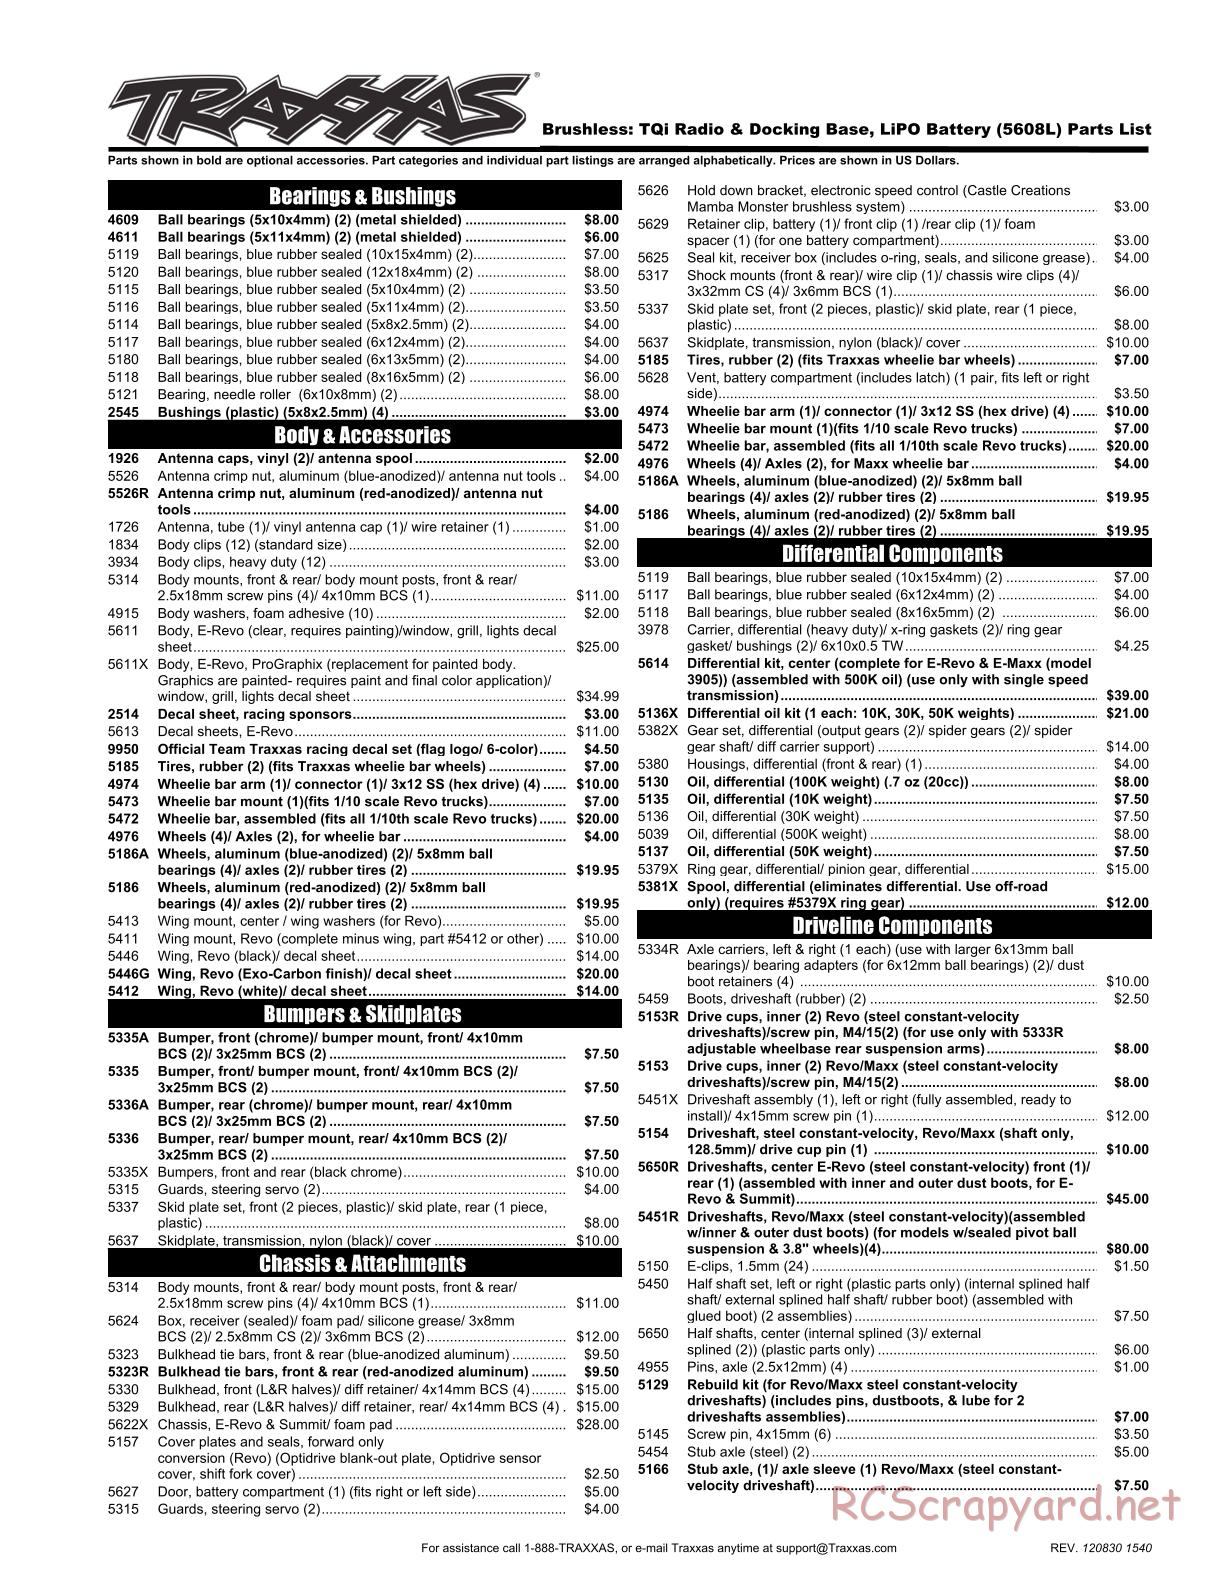 Traxxas - E-Revo Brushless (2012) - Parts List - Page 1